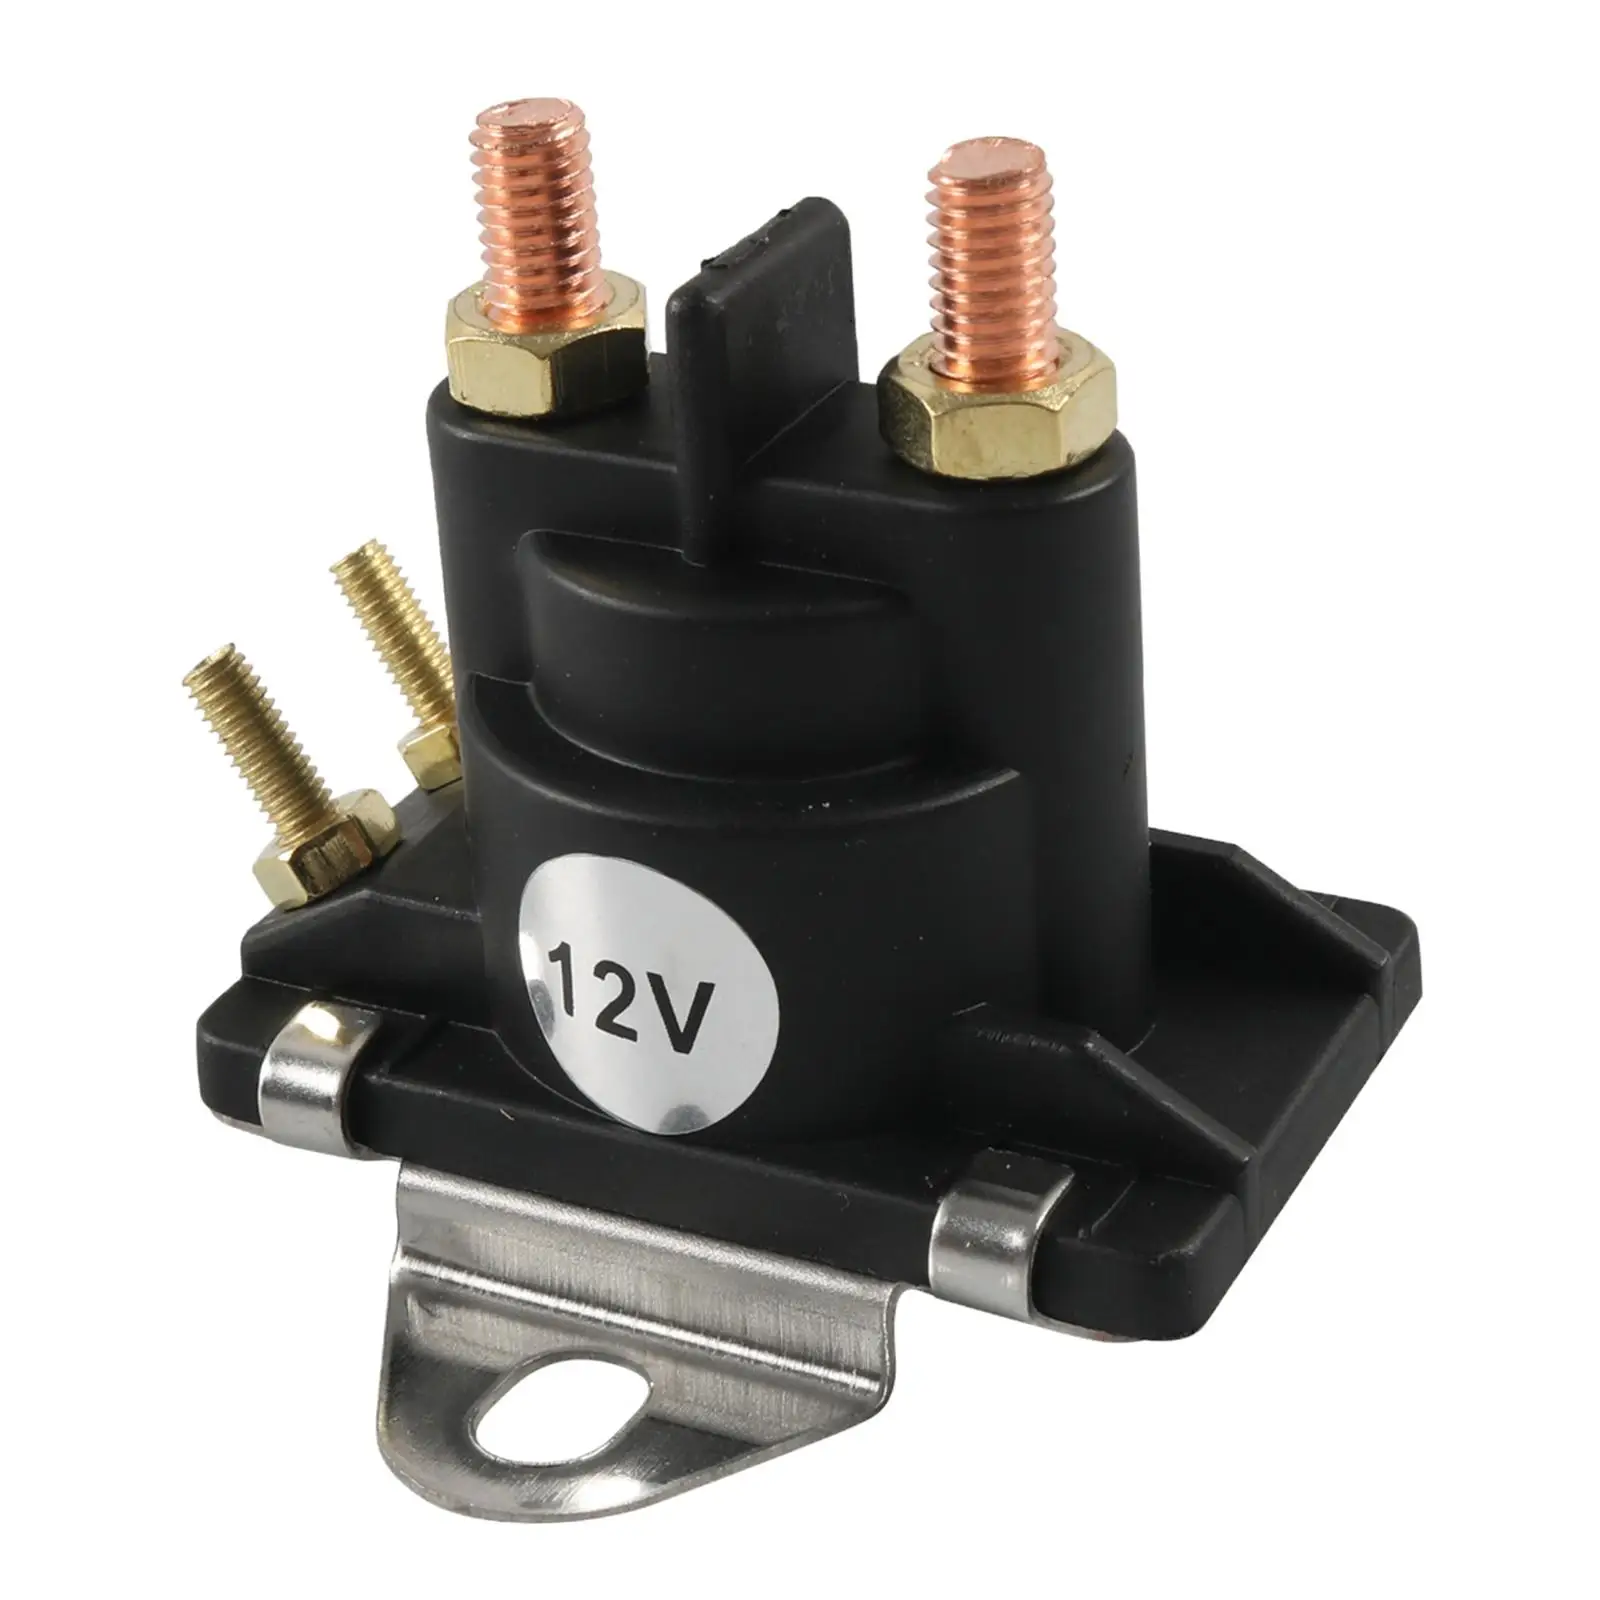 Solenoid Relay Switch 89-818997A1 for Mariner Outboard Motors Accessory Easily Install